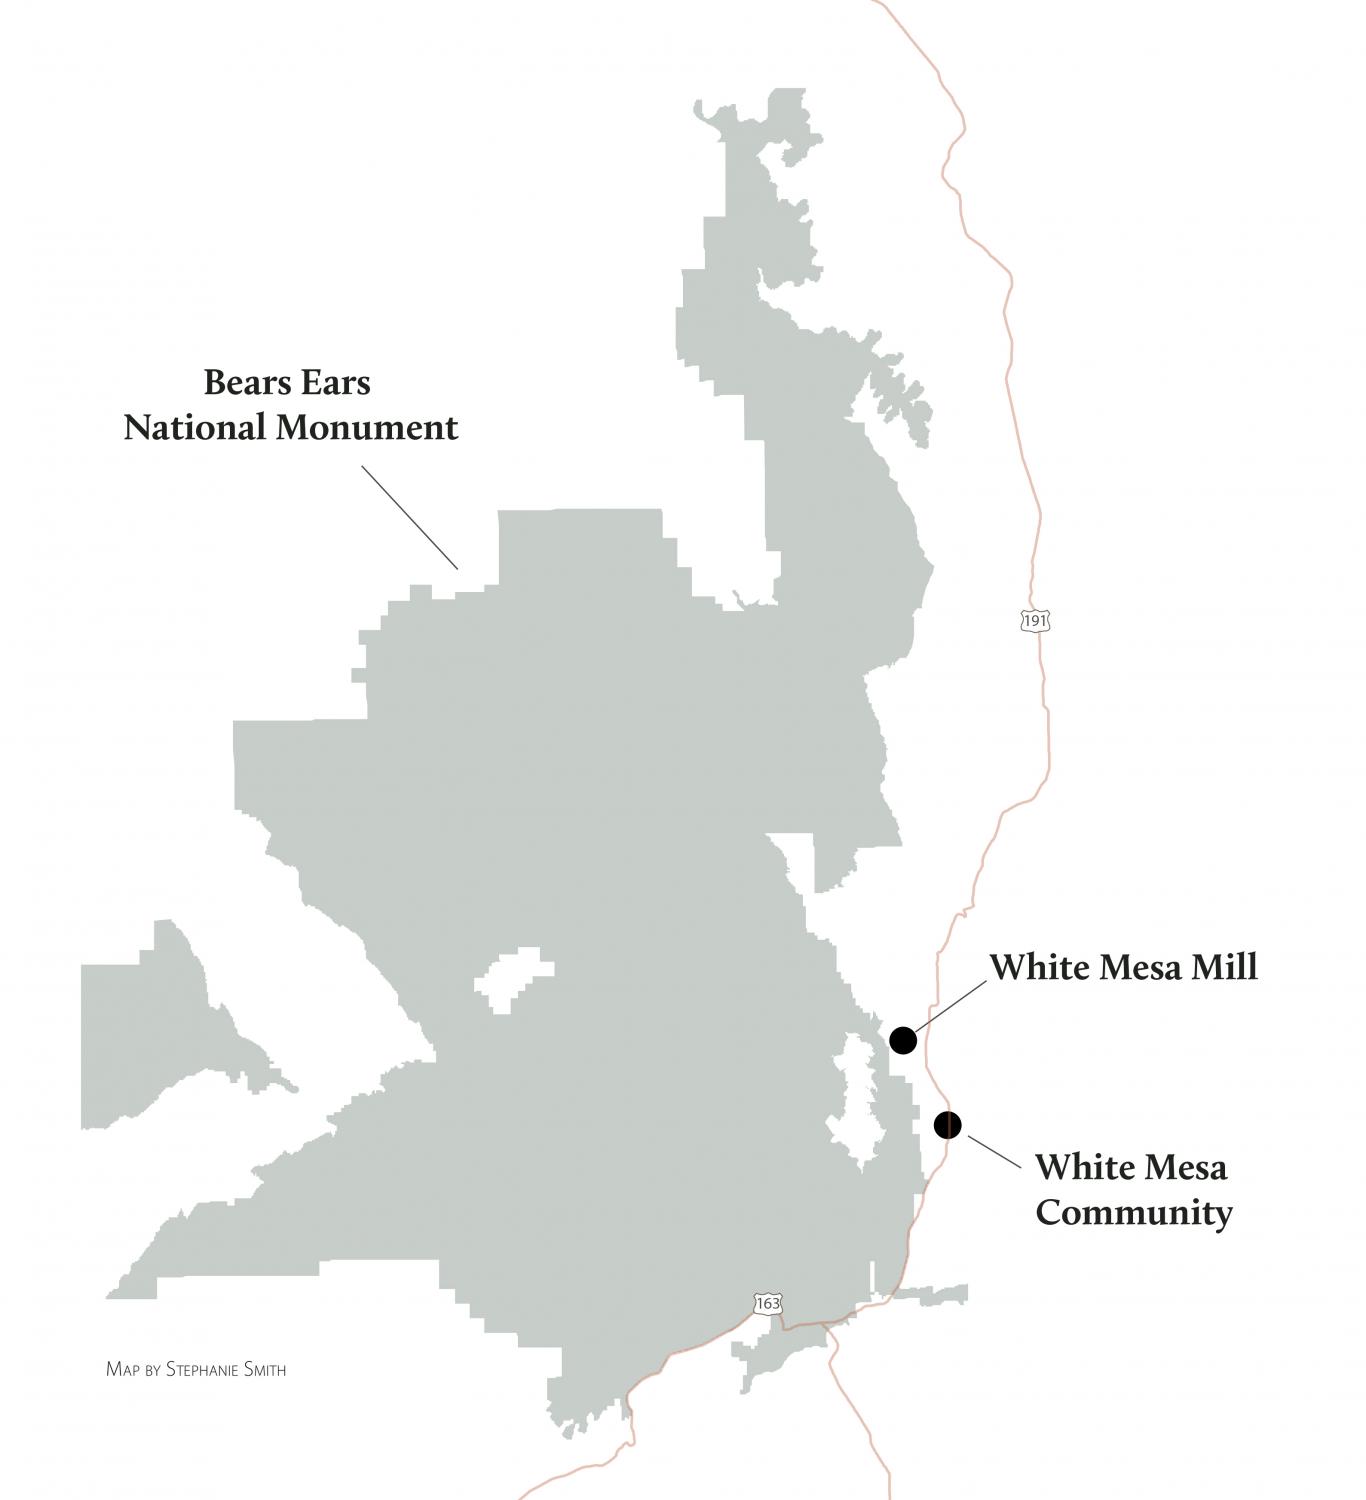 Bears Ears and White Mesa Mill map